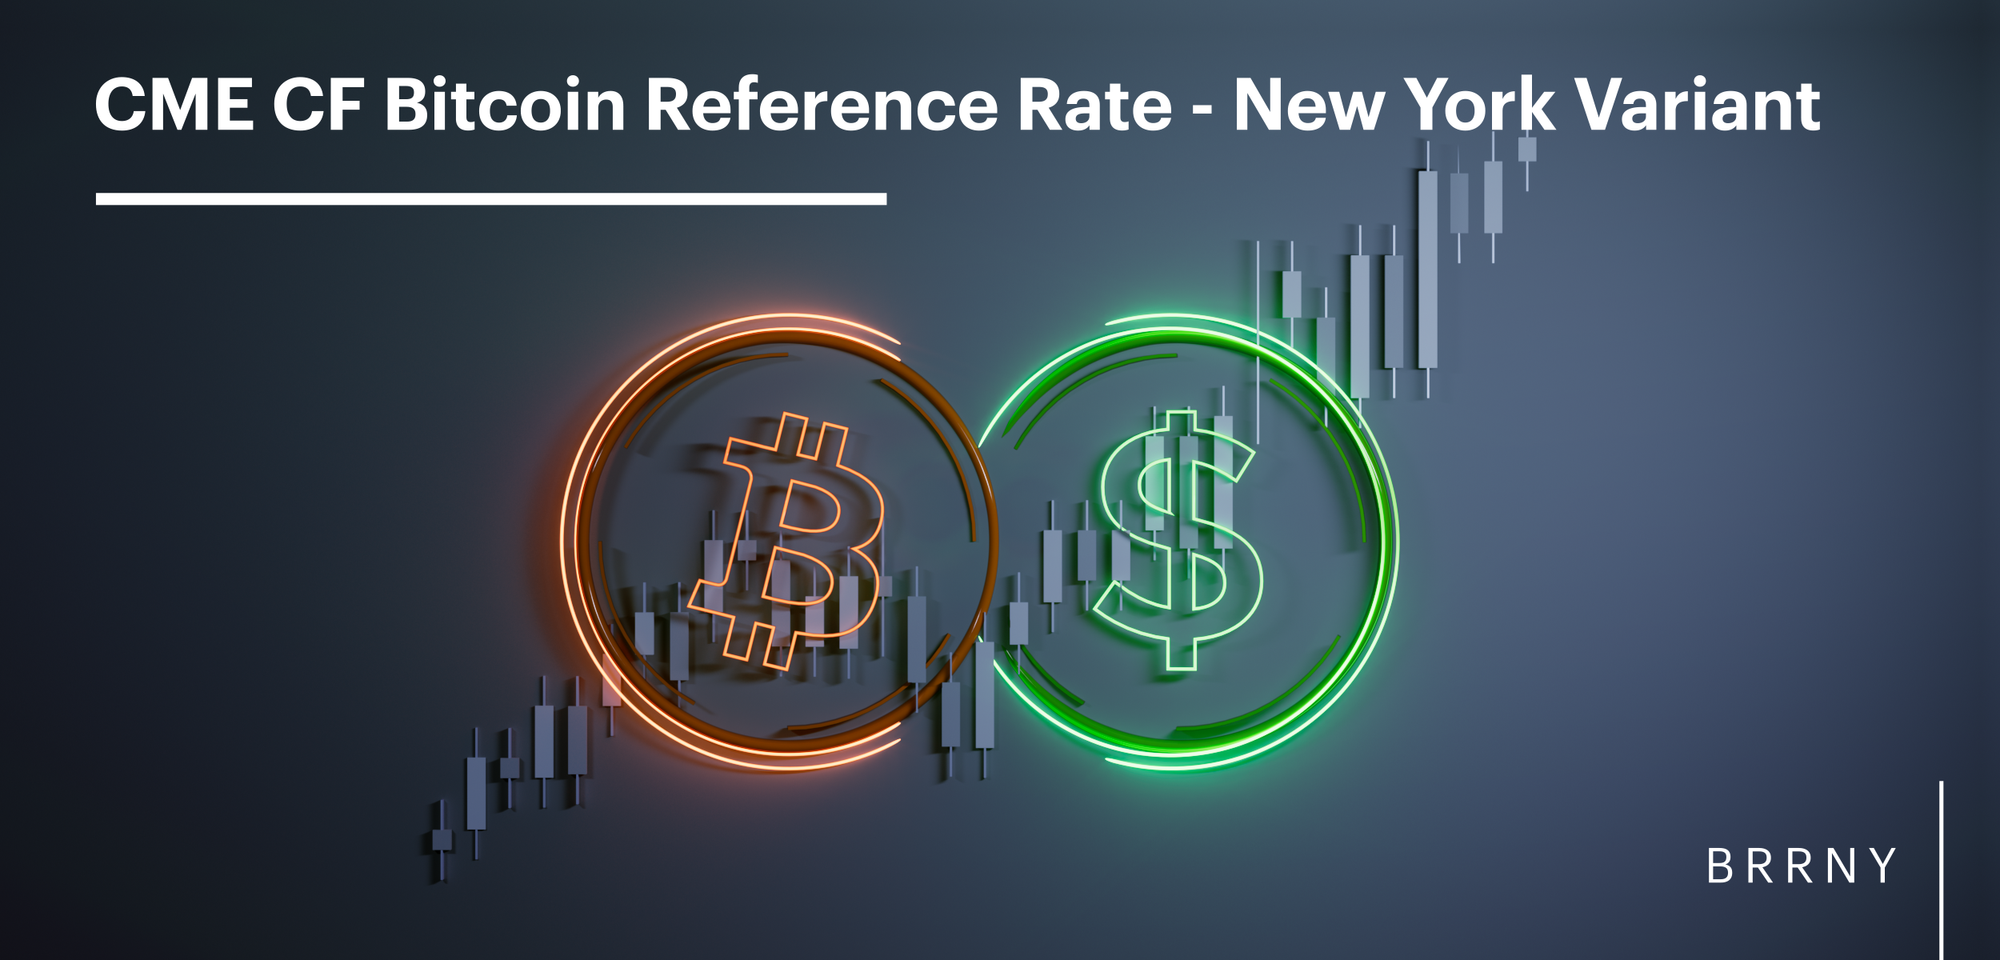 Suitability Analysis of the CME CF Bitcoin Reference Rate - New York Variant as a Basis for Regulated Financial Products